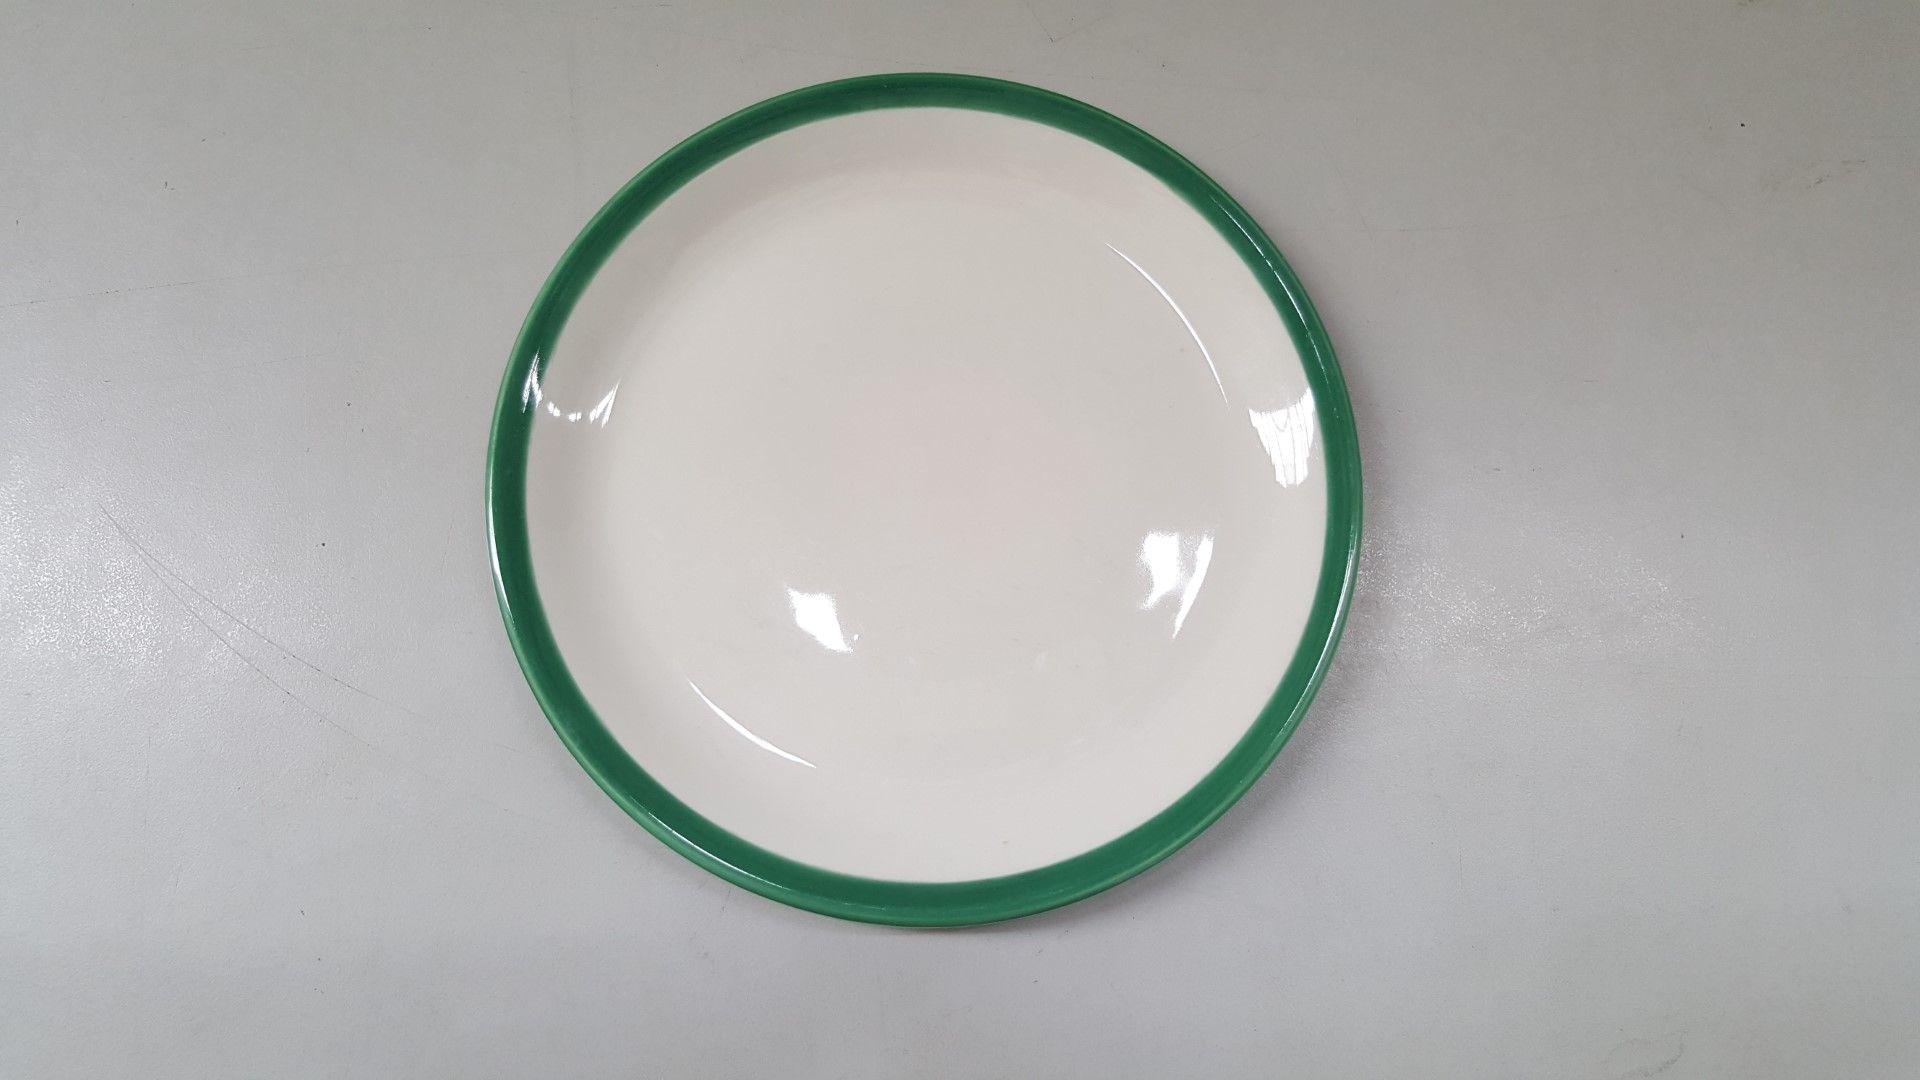 22 x Steelite Coupe Plates White With Green Outline Egde 20CM - Ref CQ281 - Image 2 of 4